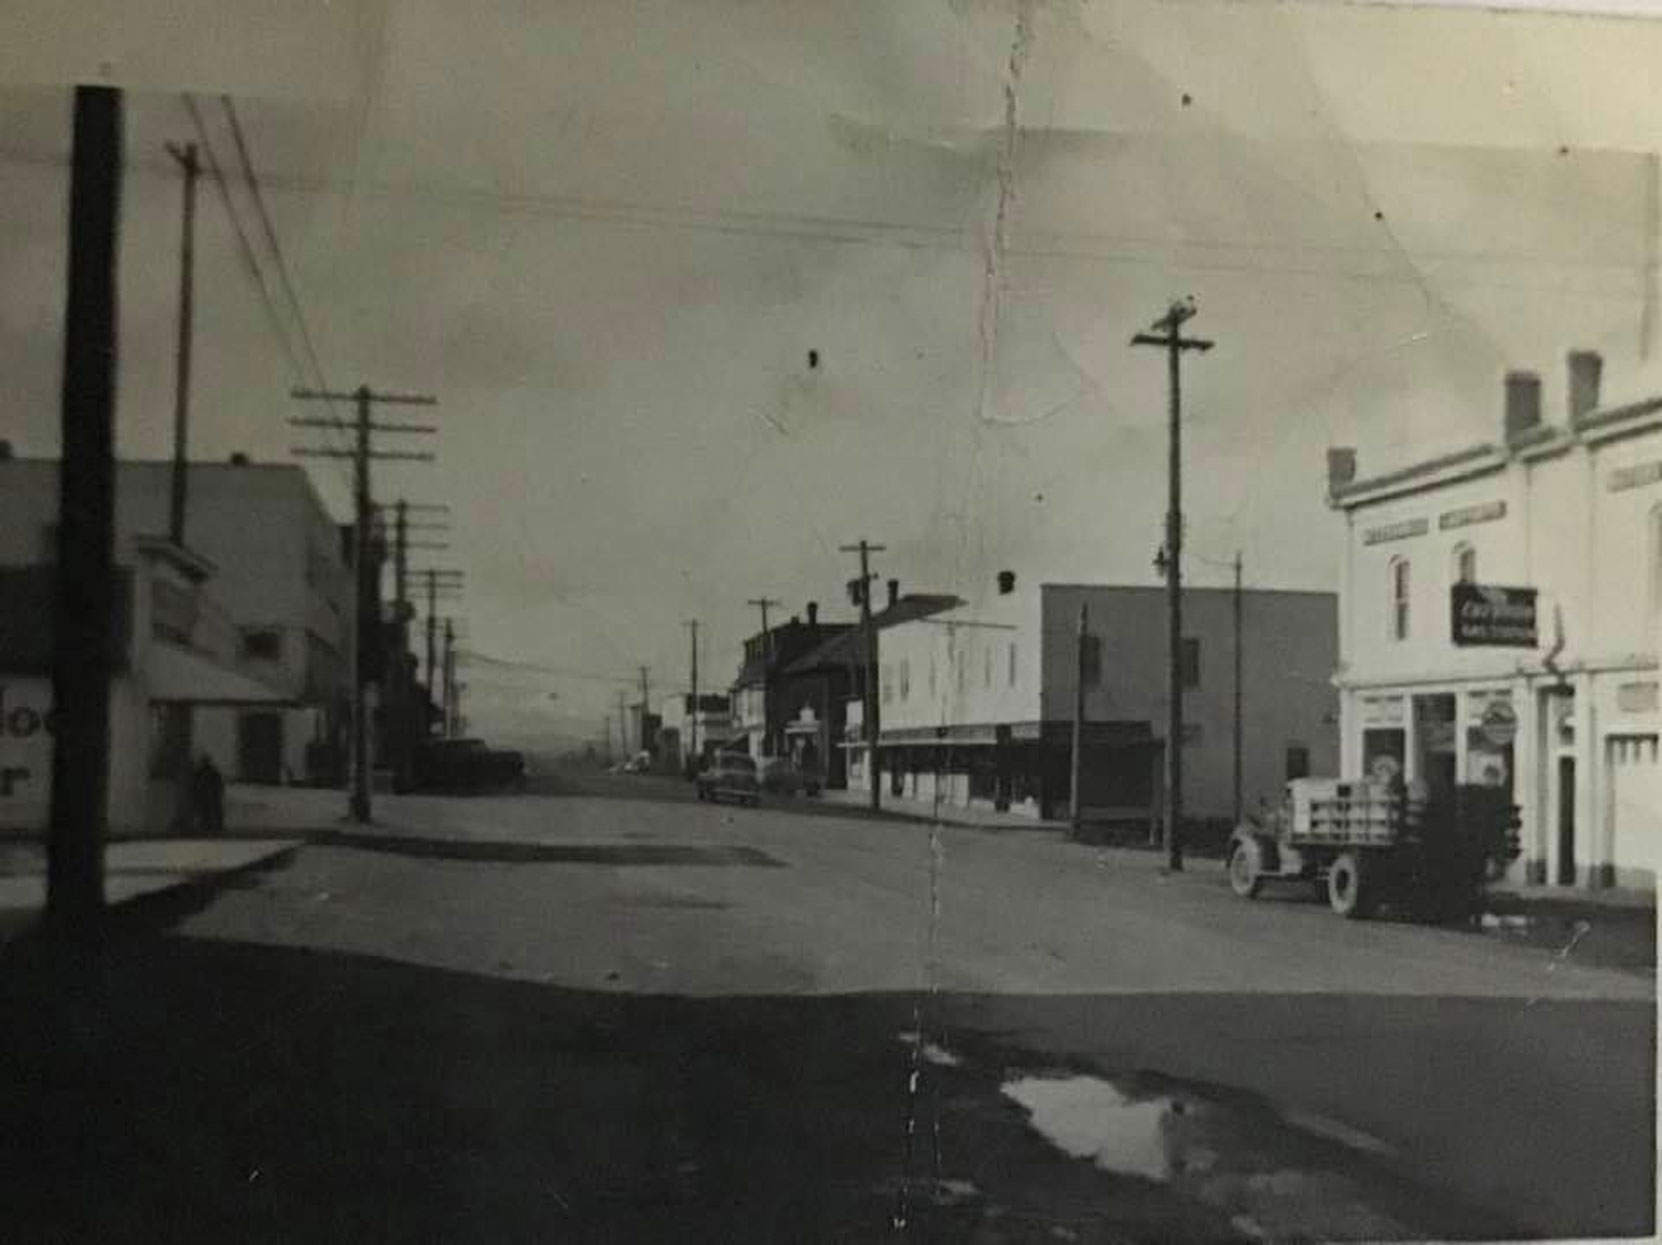 1st Avenue at Roberts Street, looking north, 1946. 341 1st Avenue (right), 411 1st Avenue (right-center), 431 1st Avenue (center), 410 1st Avenue (left).(photo: Hilary Hansen, family photo - used with permission)